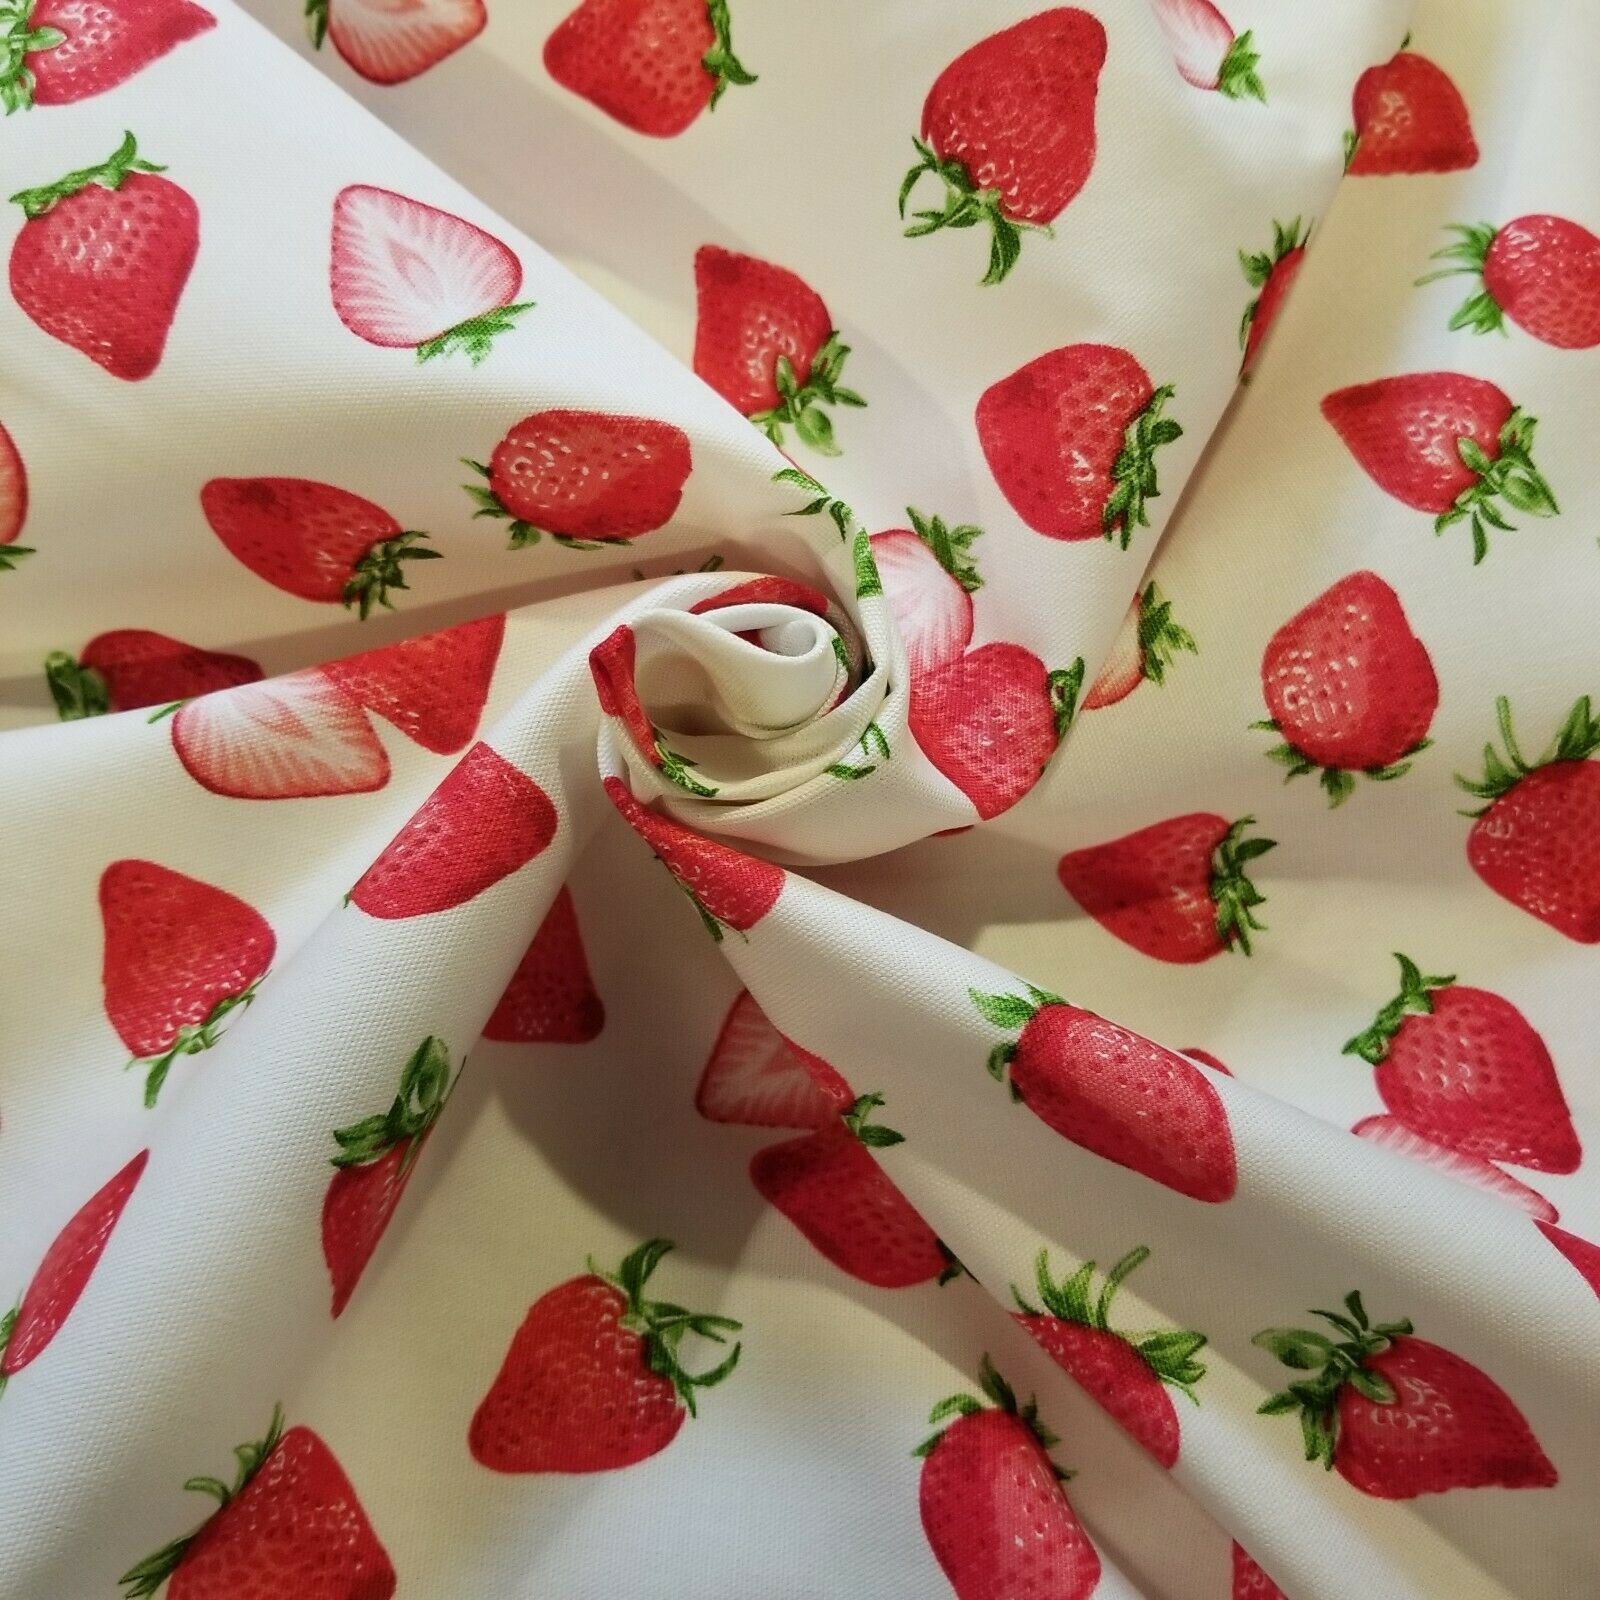 Strawberries Tossed on Creamy Light Cotton Duck Cloth - from Japan